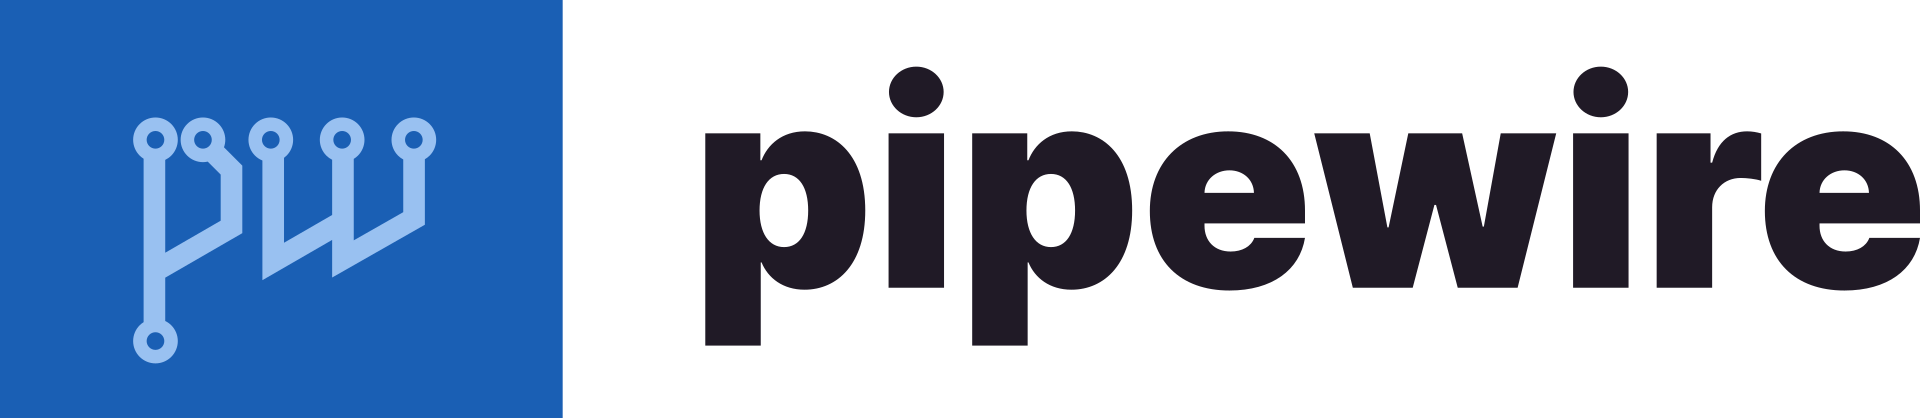 Pipewire logo.svg